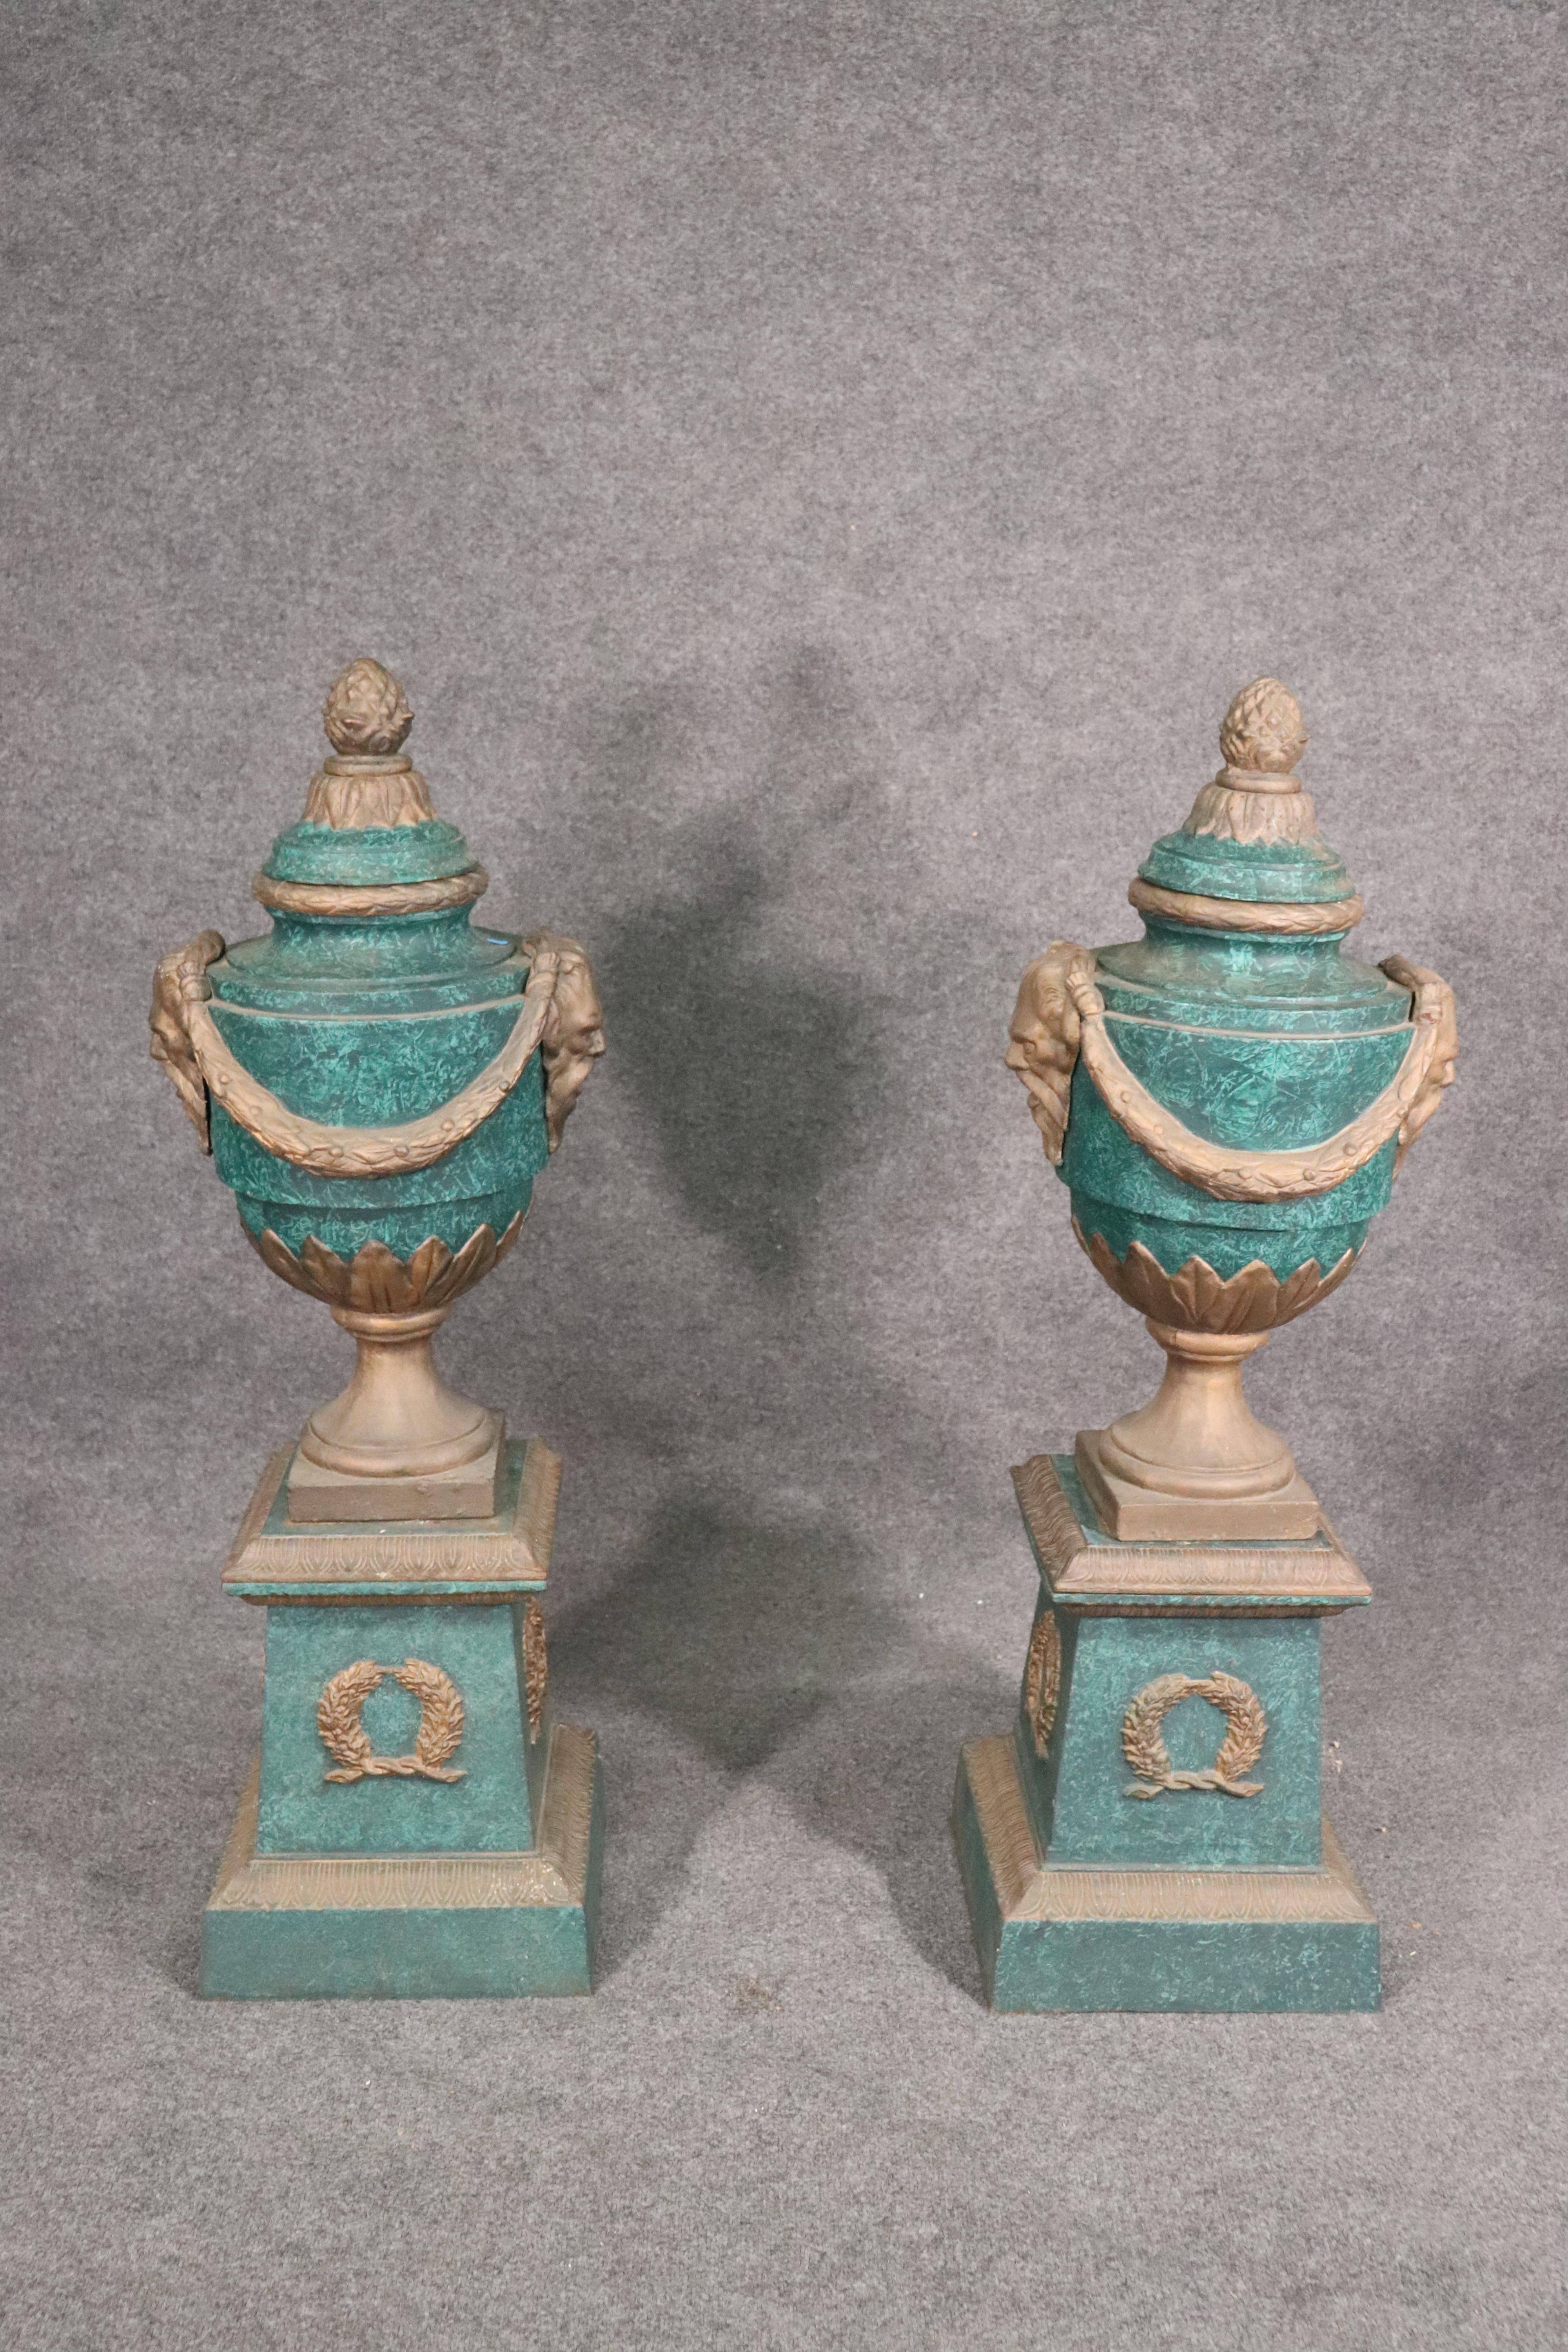 This large pair if antique 1900s era urns have been painted to look like they are made of malachite and bronze. These urns are large and come apart into many sections for delivery. The urns measure 50 tall x 14 .5 wide x 14.5 deep and are perfect